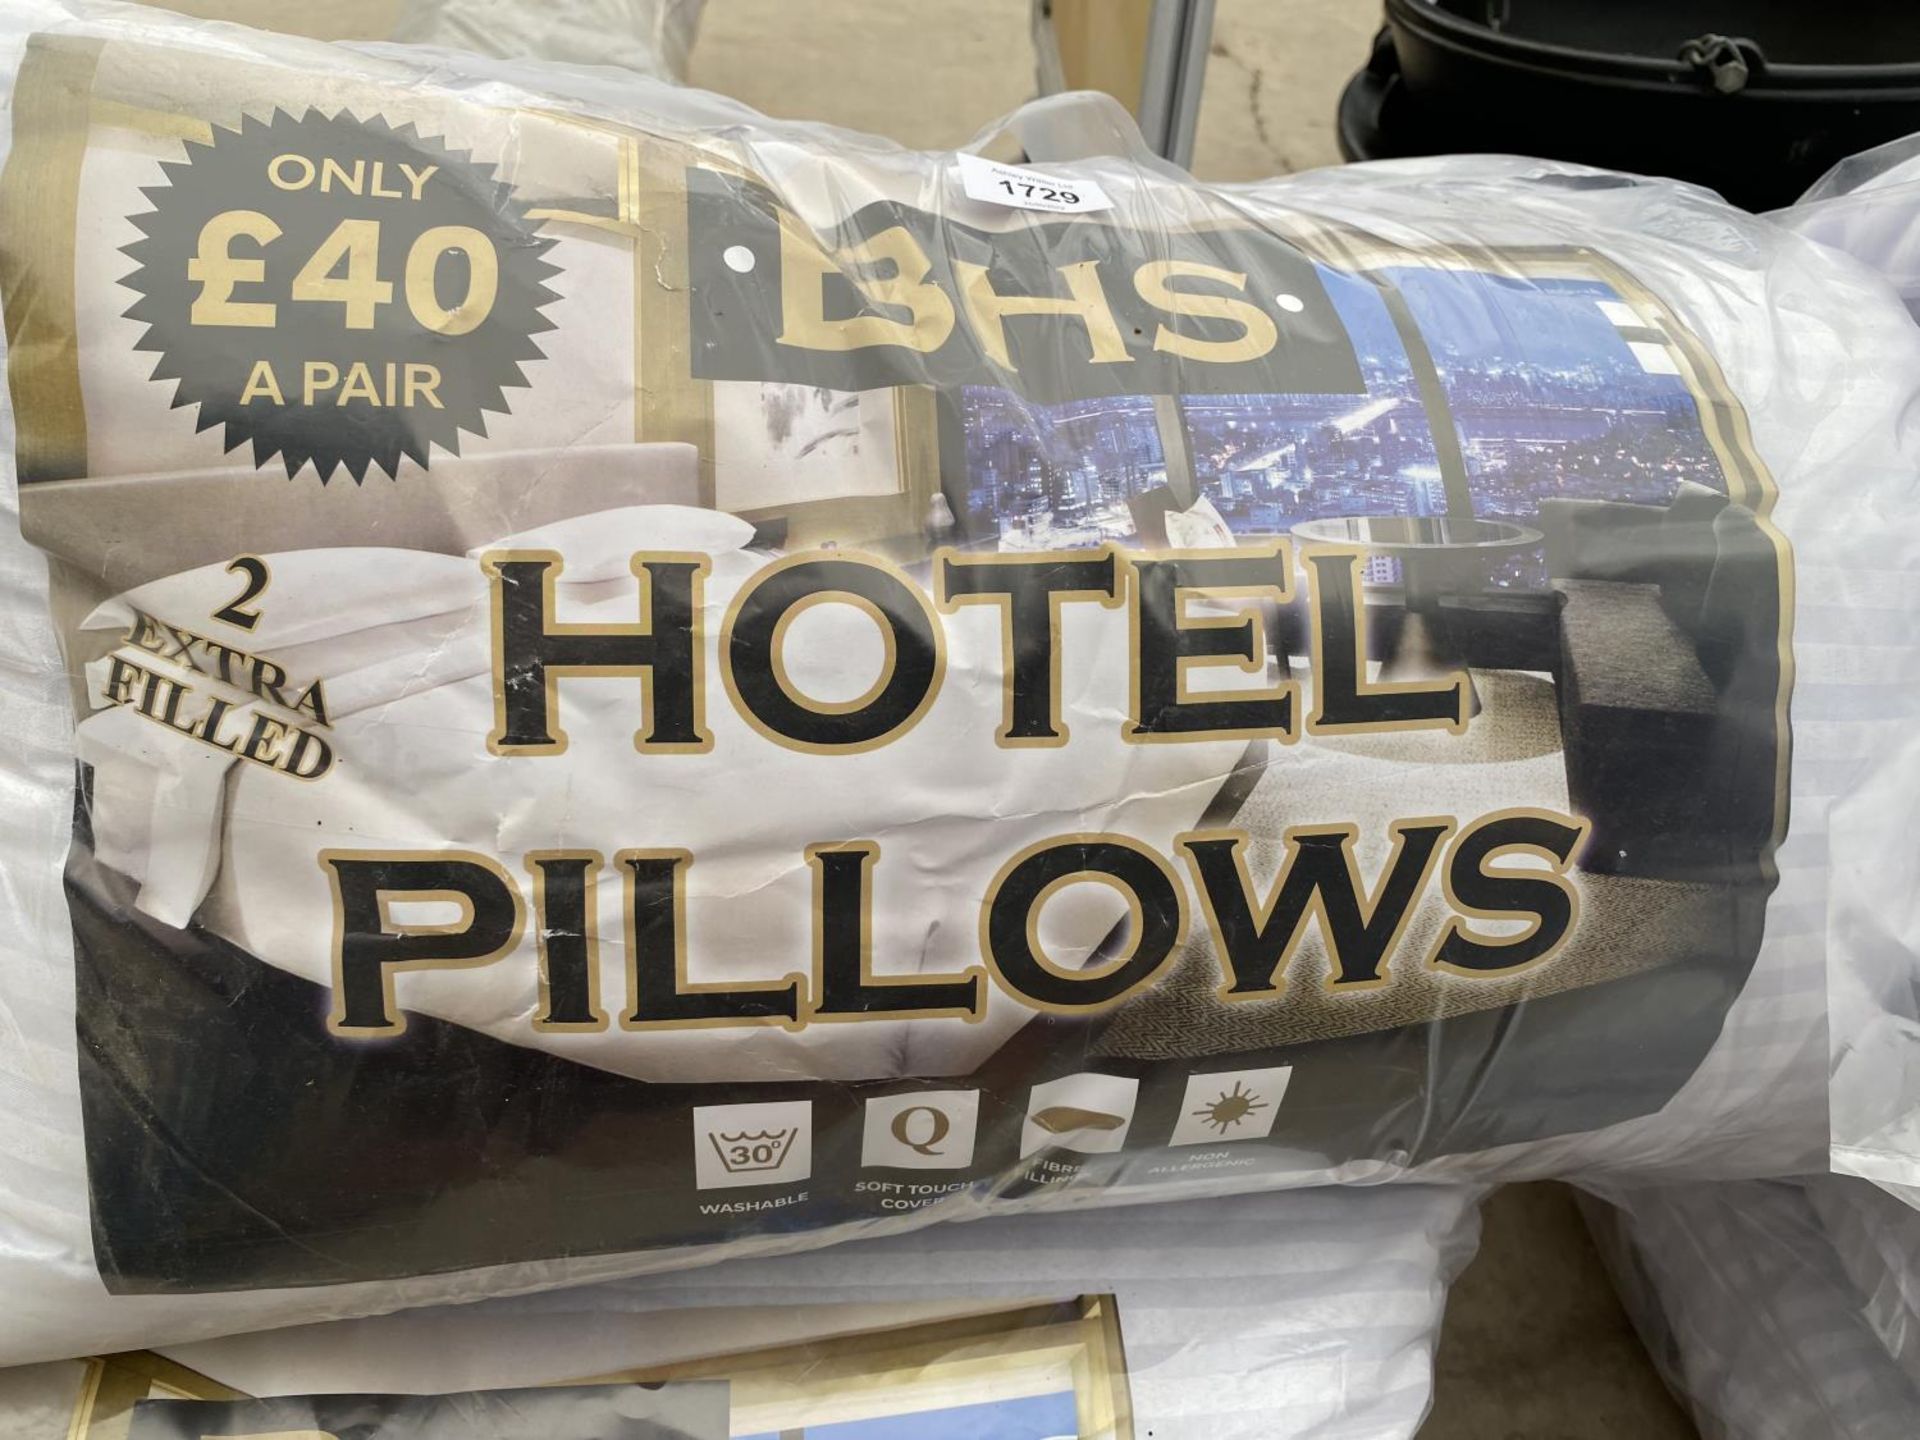 SIX AS NEW BHS HOTEL PILLOWS - Image 5 of 6